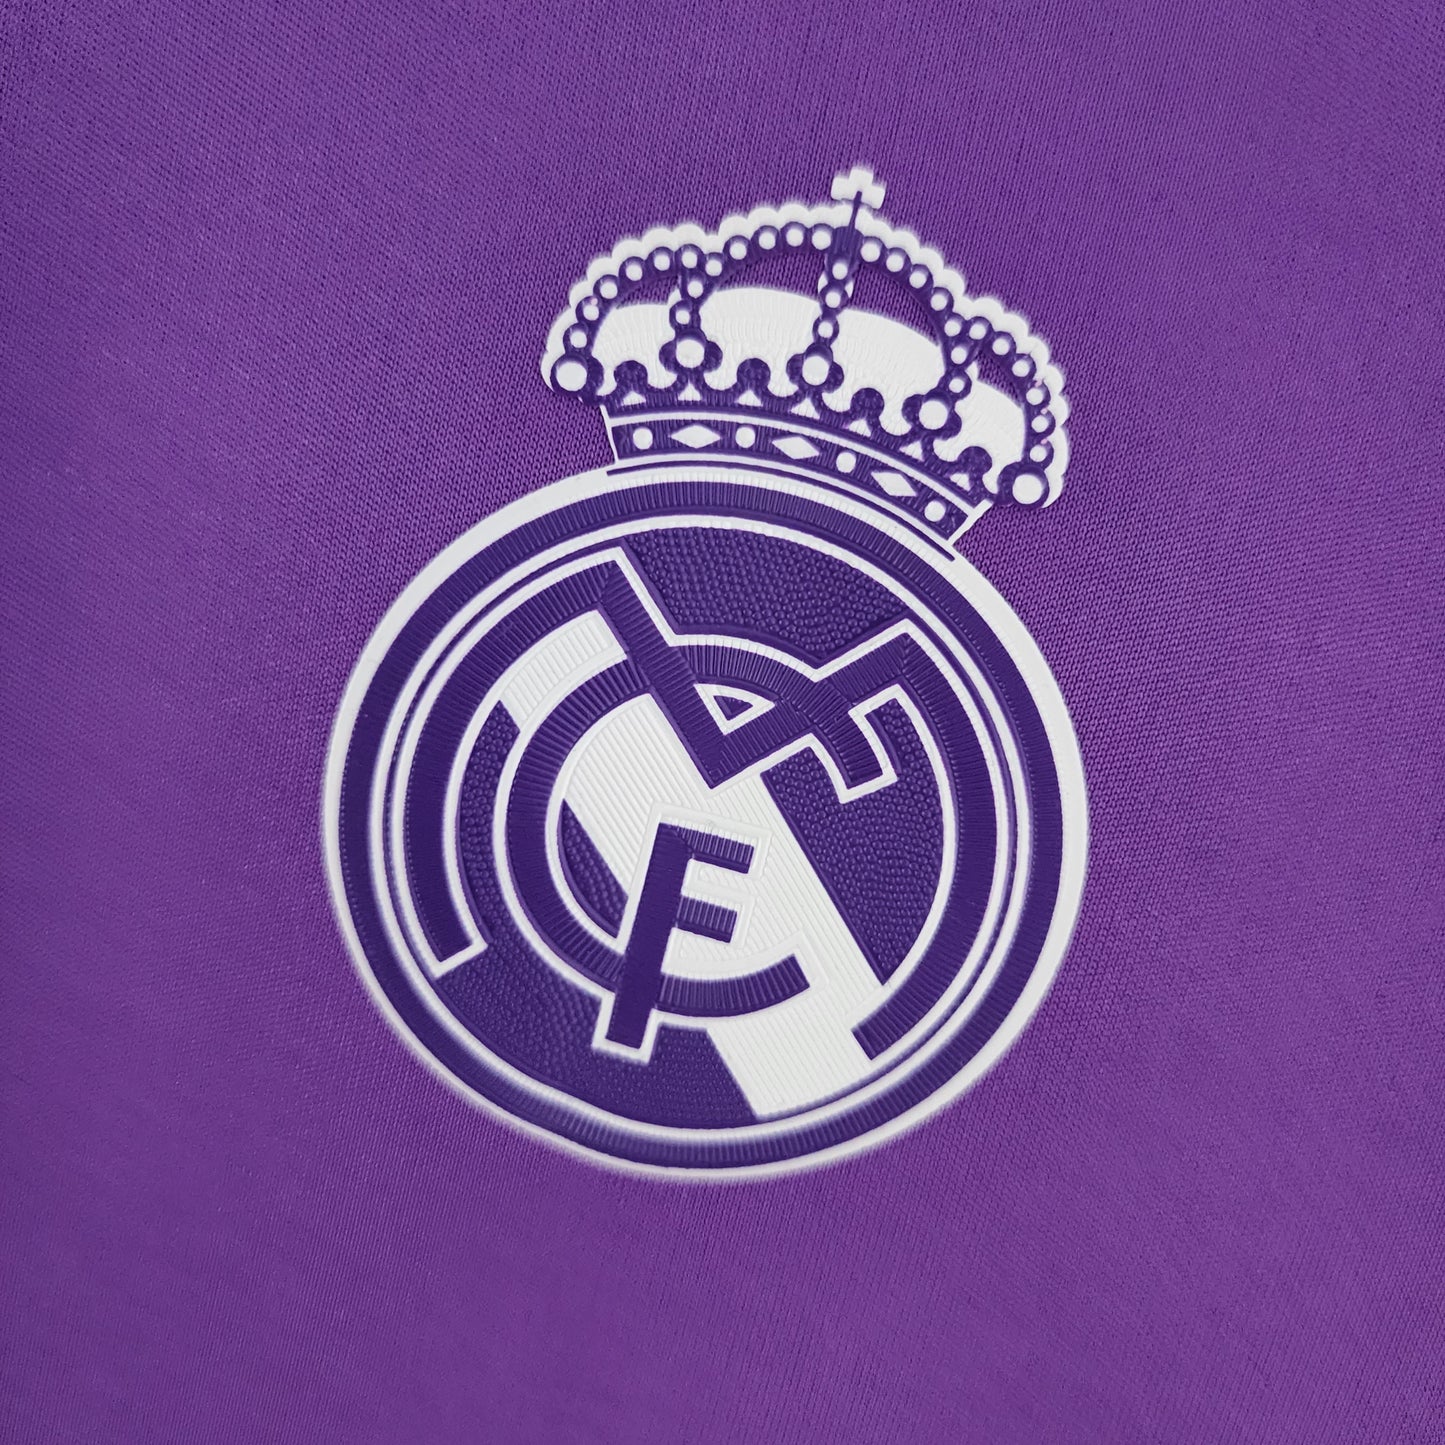 REAL MADRID 2017 - 2018 AWAY JERSEY